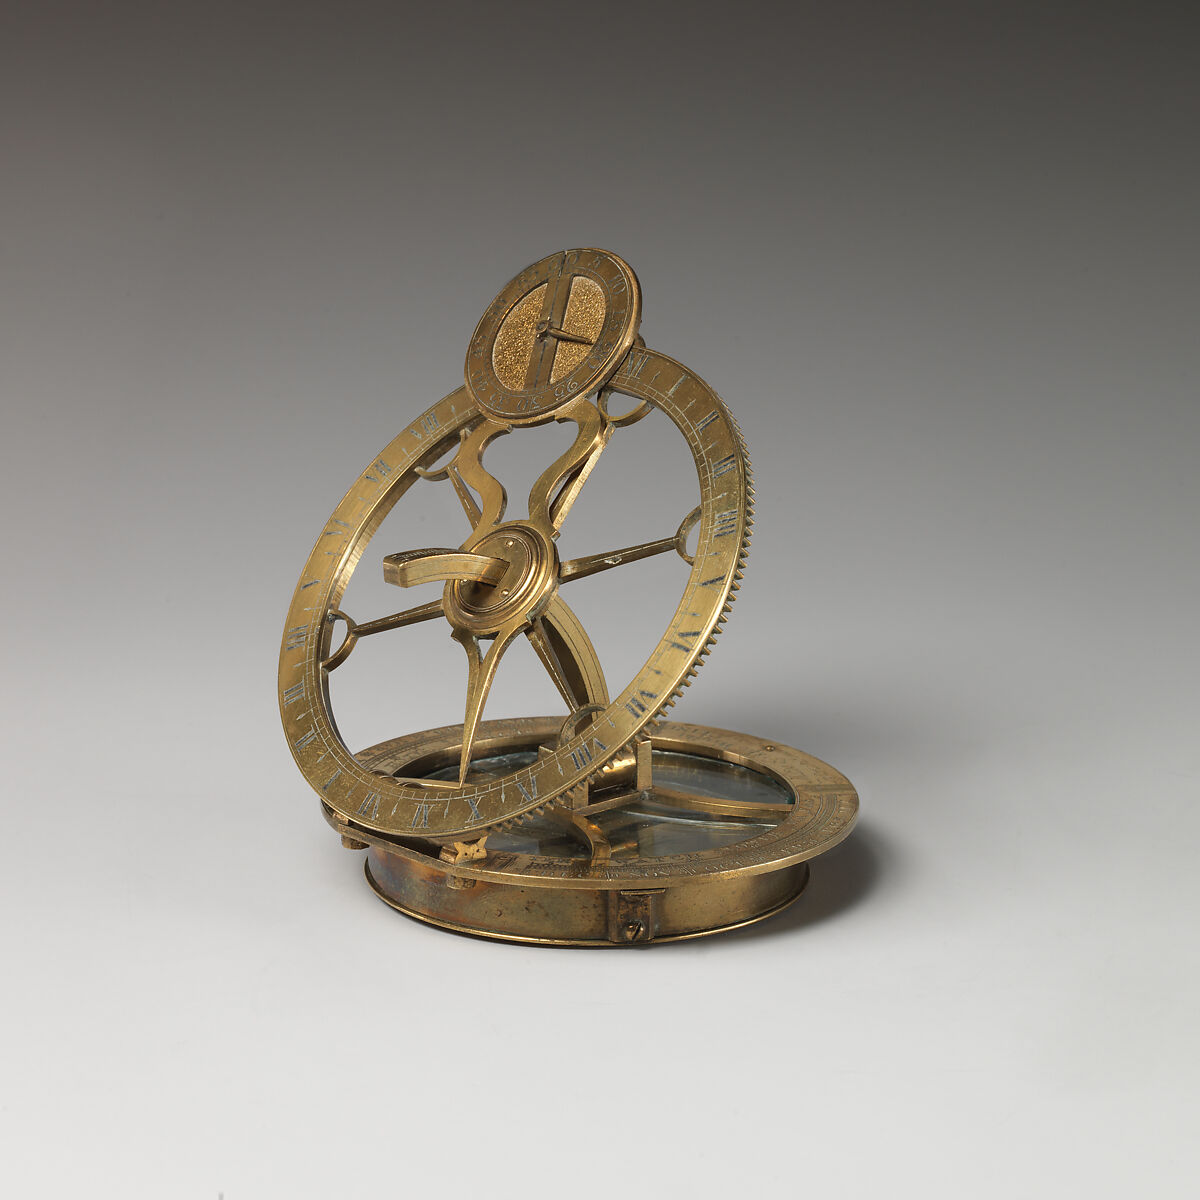 Equinoctial dial, Thomas Wright, Gilded brass, British 